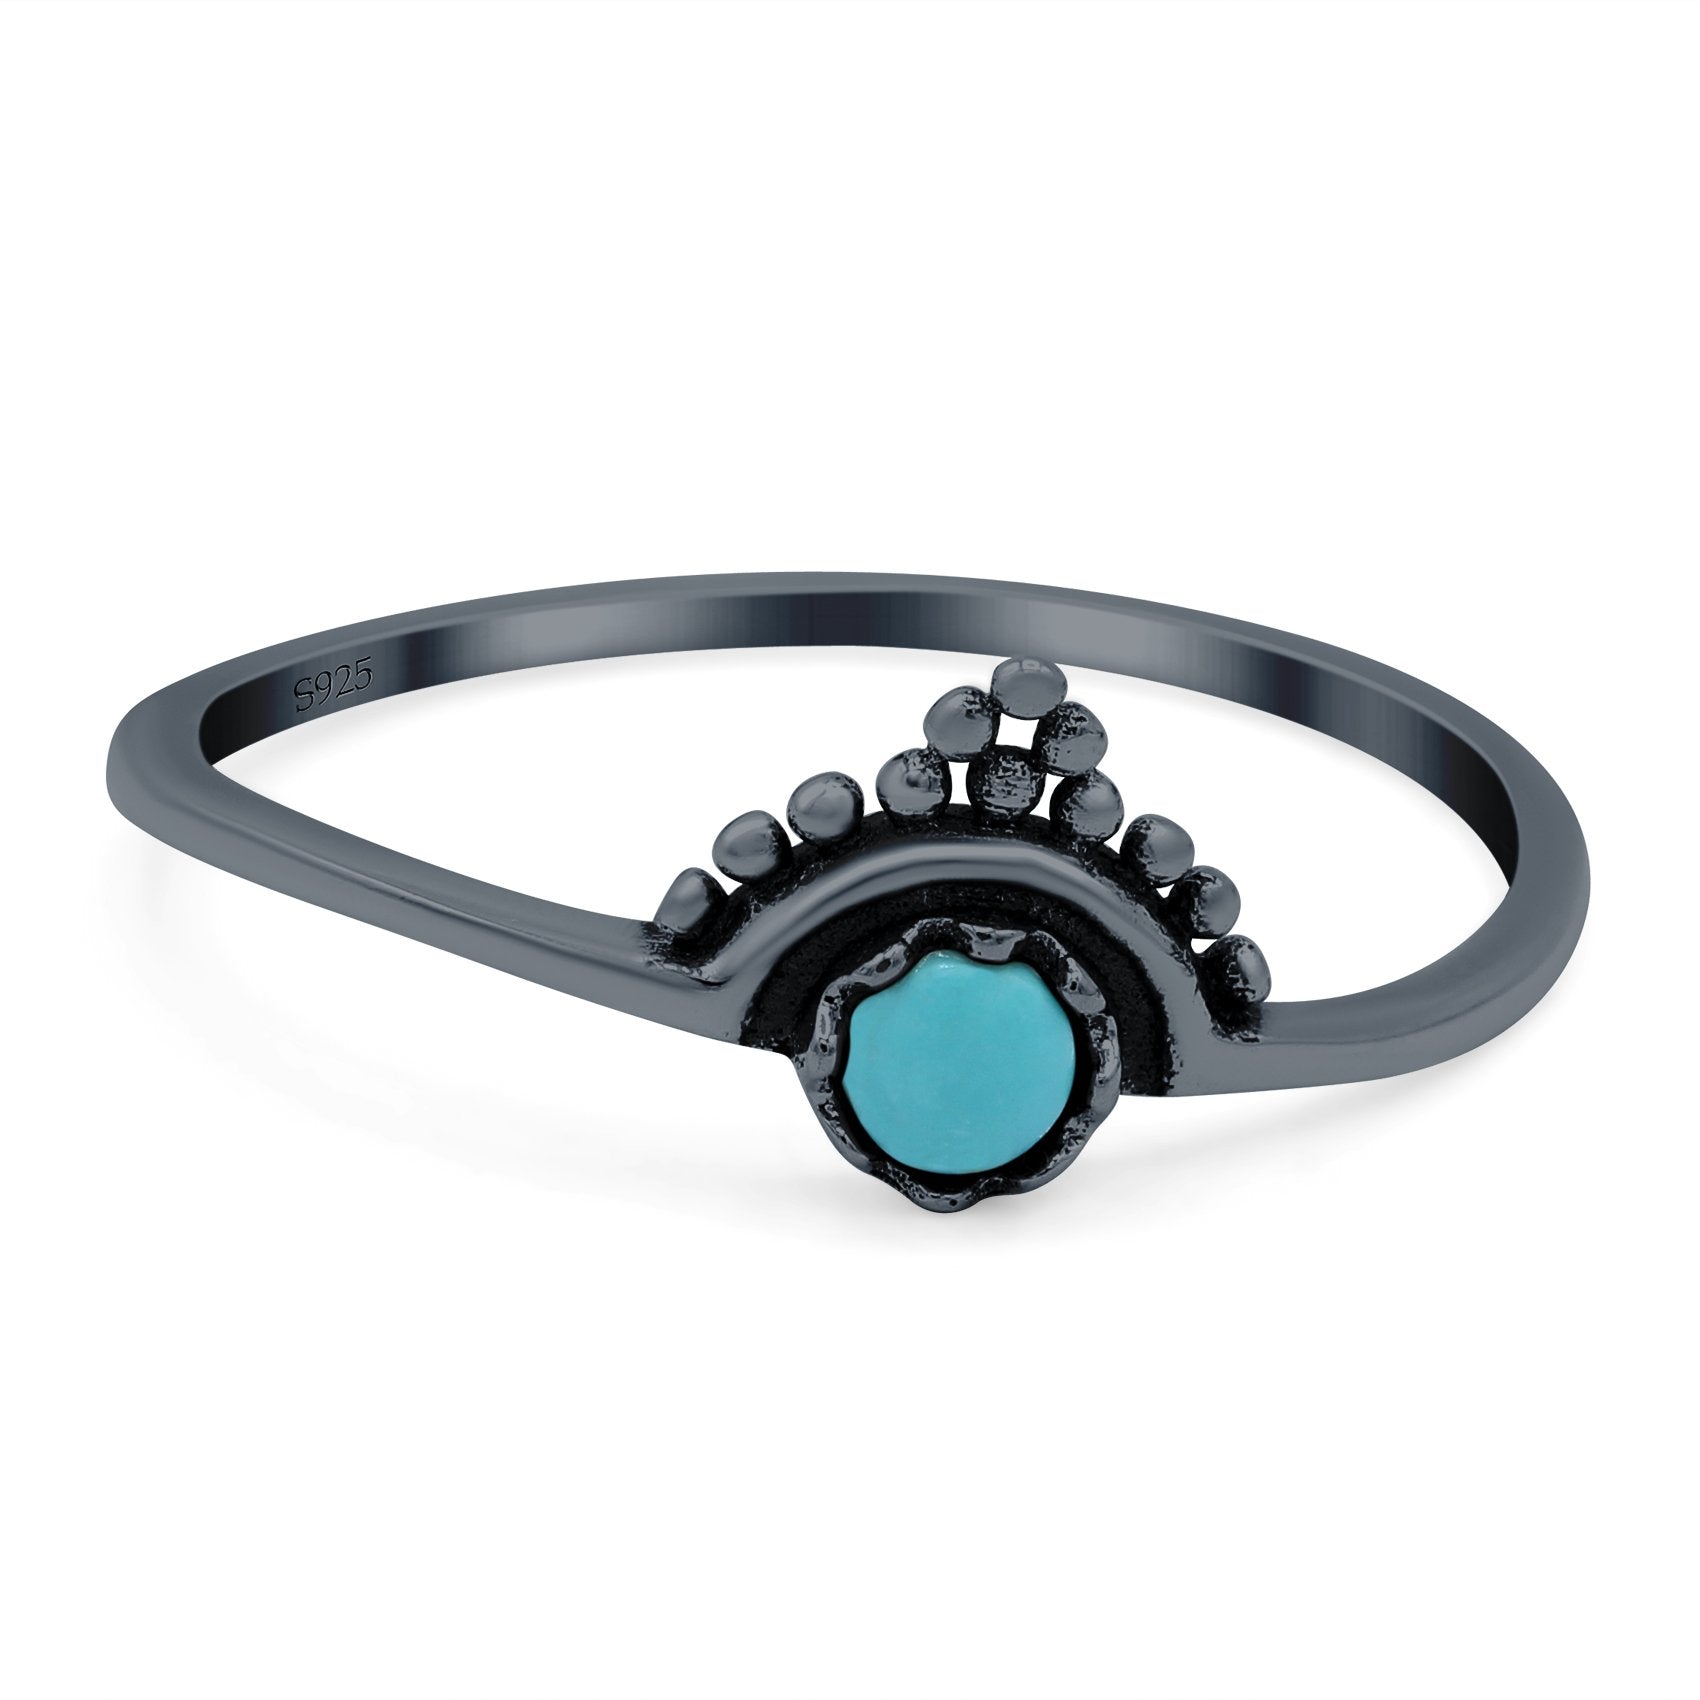 Bali Band Ring Round Simulated Turquoise 925 Sterling Silver